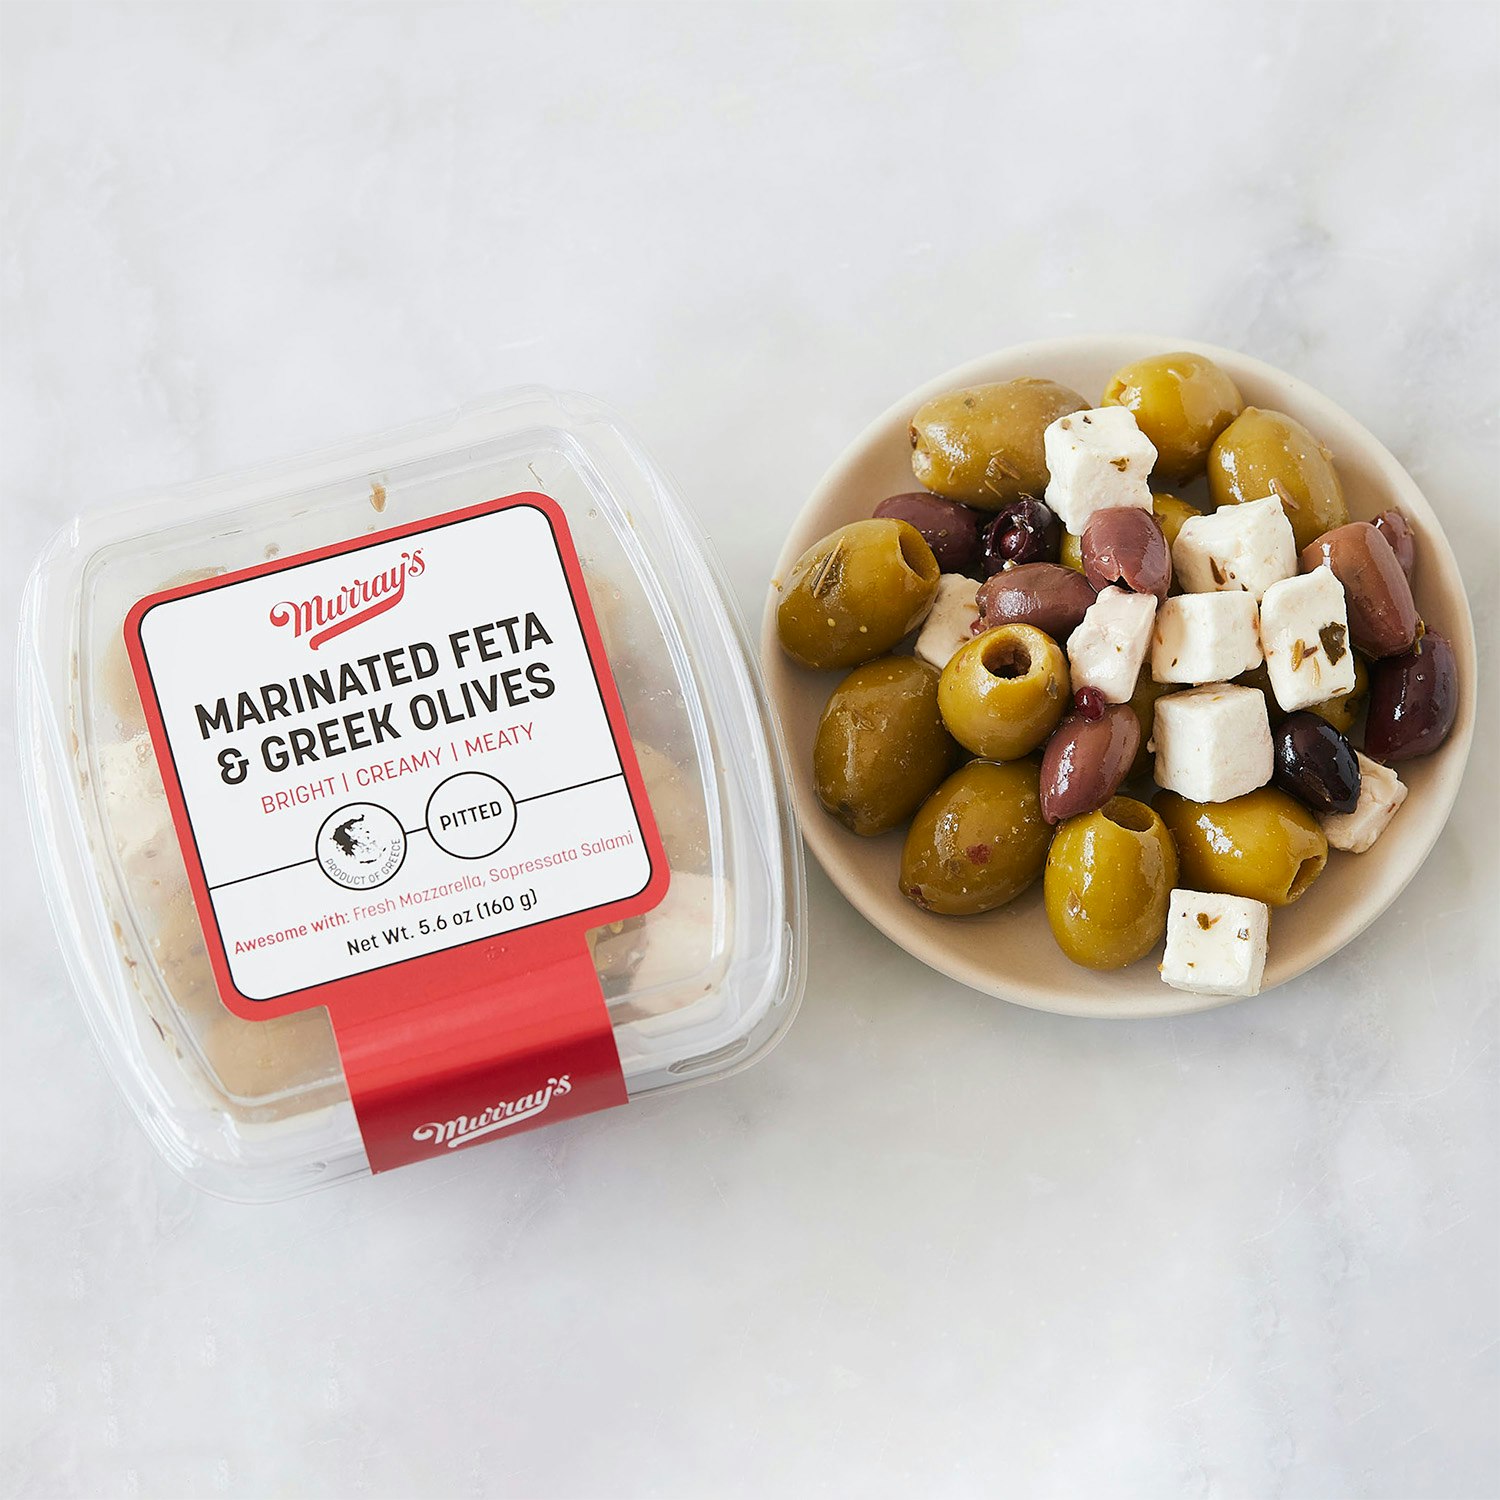 Murrays-Marinated-Feta-And-Greek-Olives-specialty-foods-127343-04